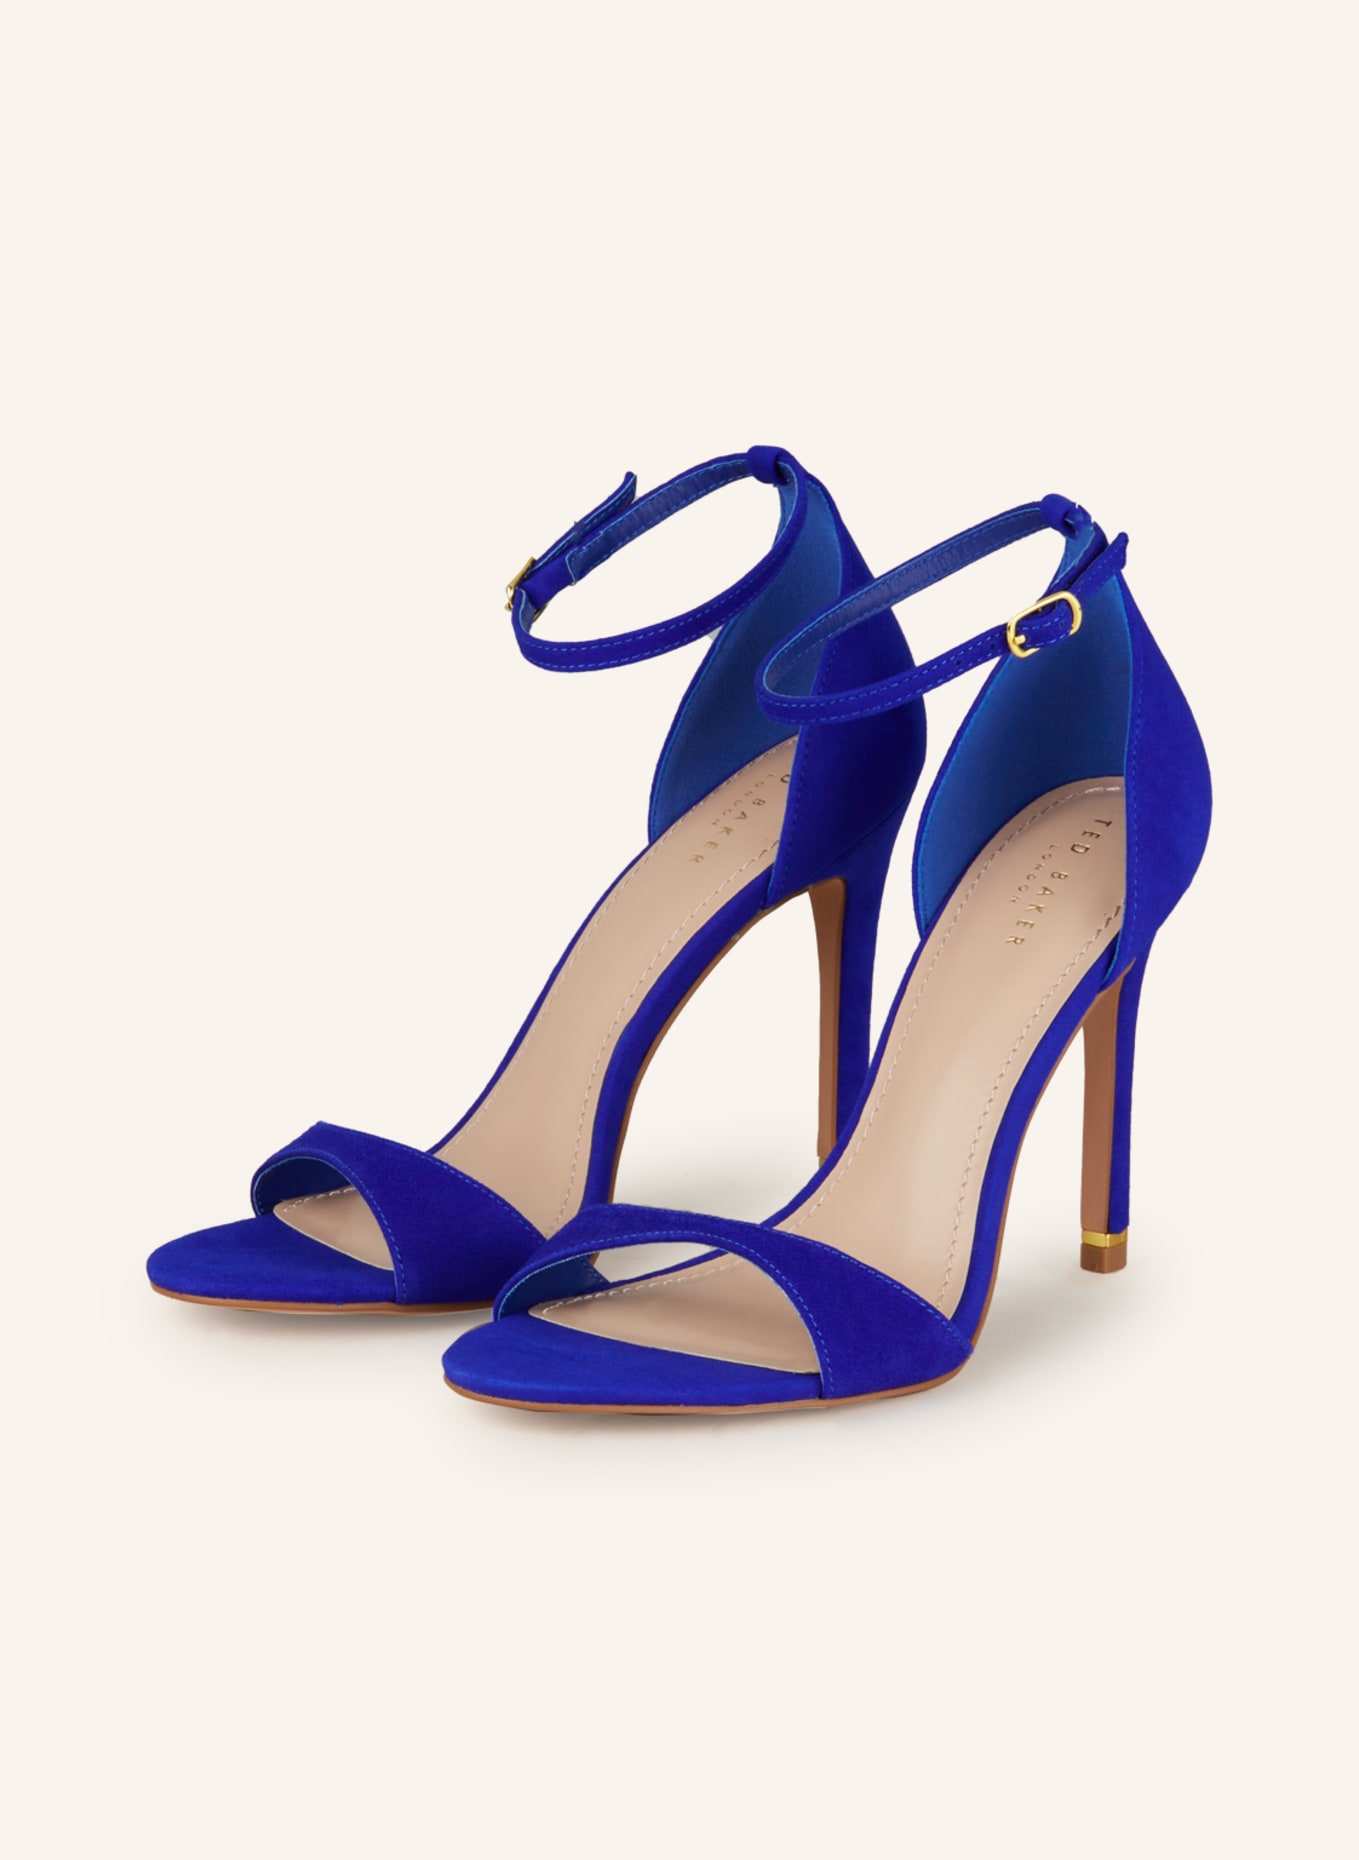 Shop Ted Baker Suede Sandals for Women up to 60 Off  DealDoodle